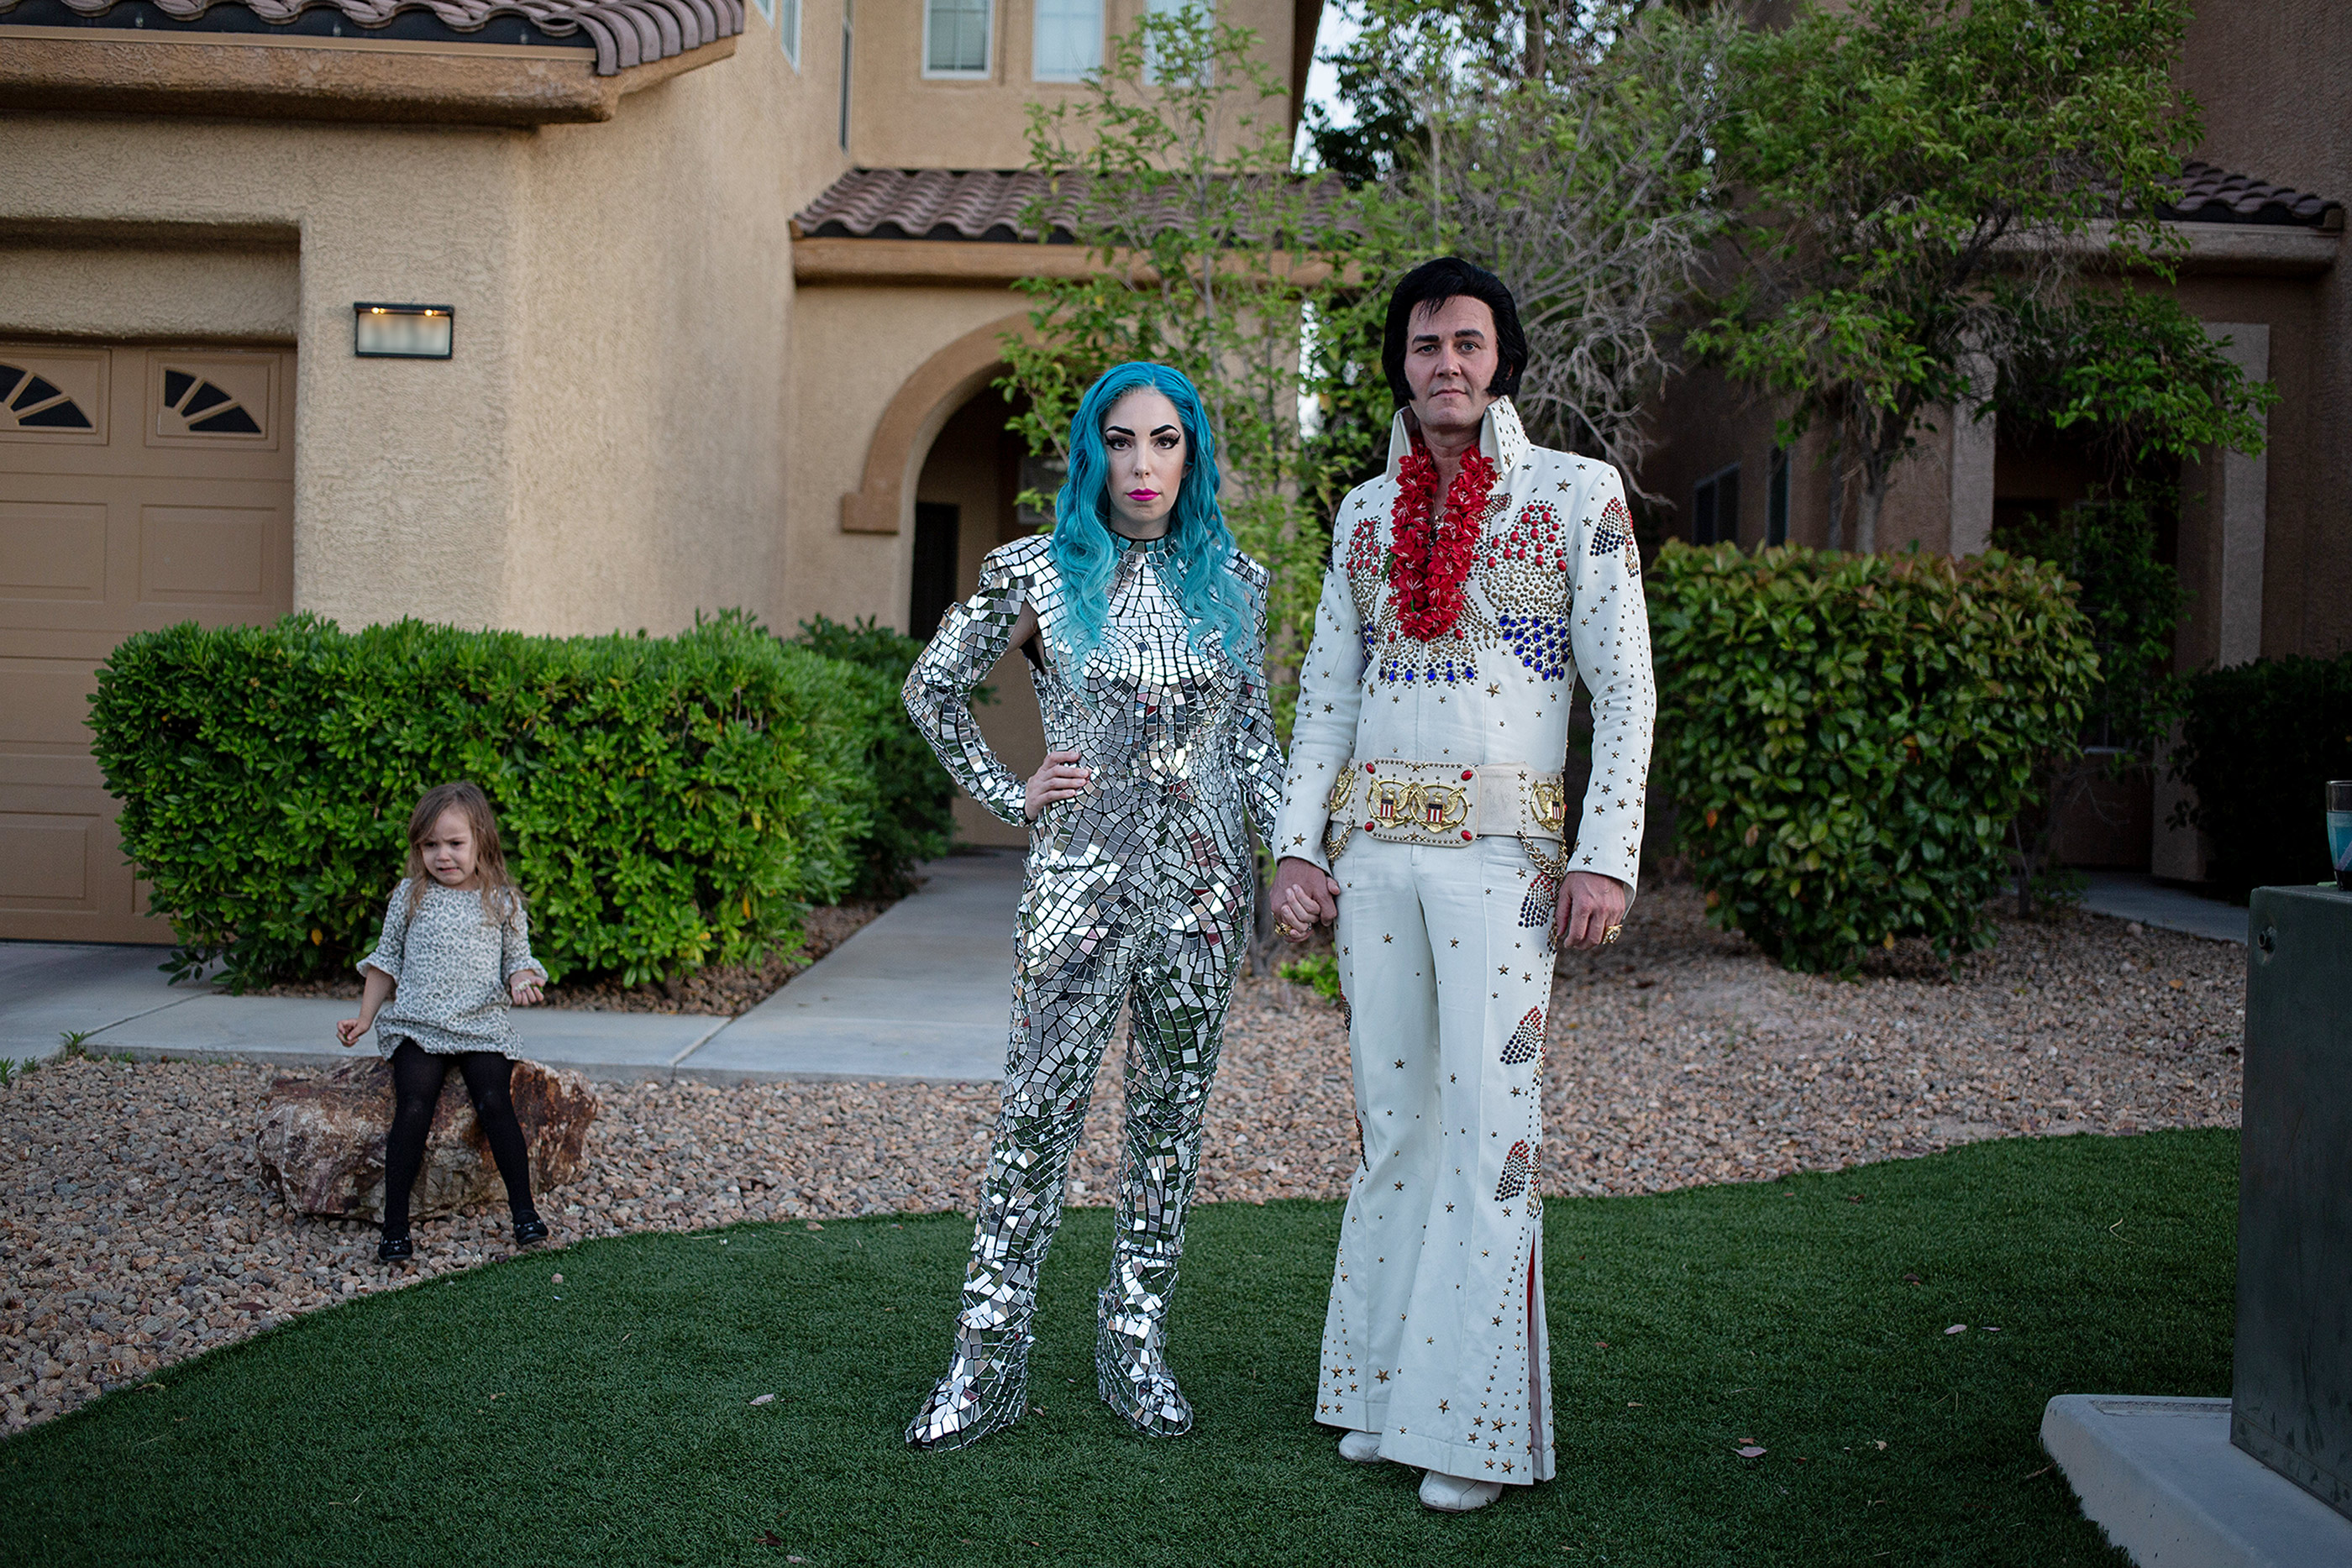 <strong>Tierney Allen, 33, Lady Gaga Impersonator, Travis Allen, 42, Elvis Impersonator, and their daughter Charlotte, 3, Las Vegas.</strong> The couple is two of more than 80,000 gig workers in Las Vegas who are now unable to make a living. (Daniella Zalcman for TIME)